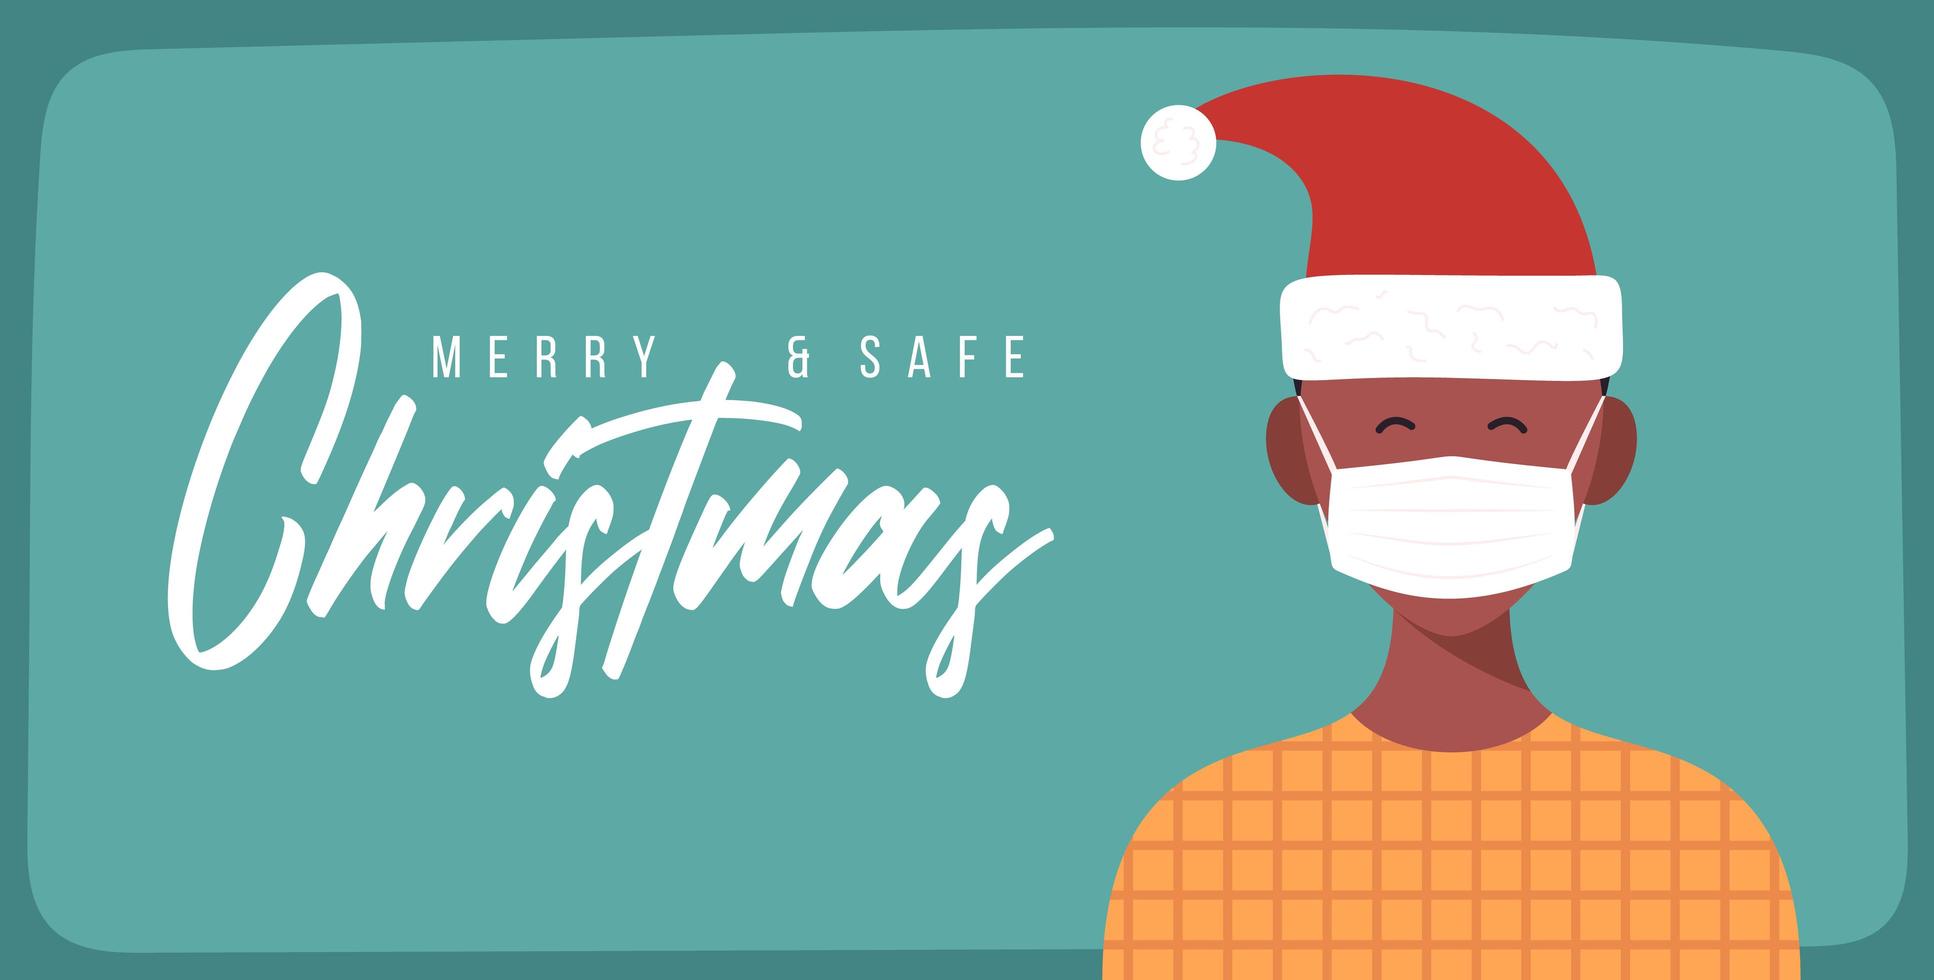 Merry and safe Christmas. African Man in Santa Claus hat wearing protective face mask against coronavirus. Christmas during pandemic. Holiday greeting card Xmas celebration. Flat Vector illustration.